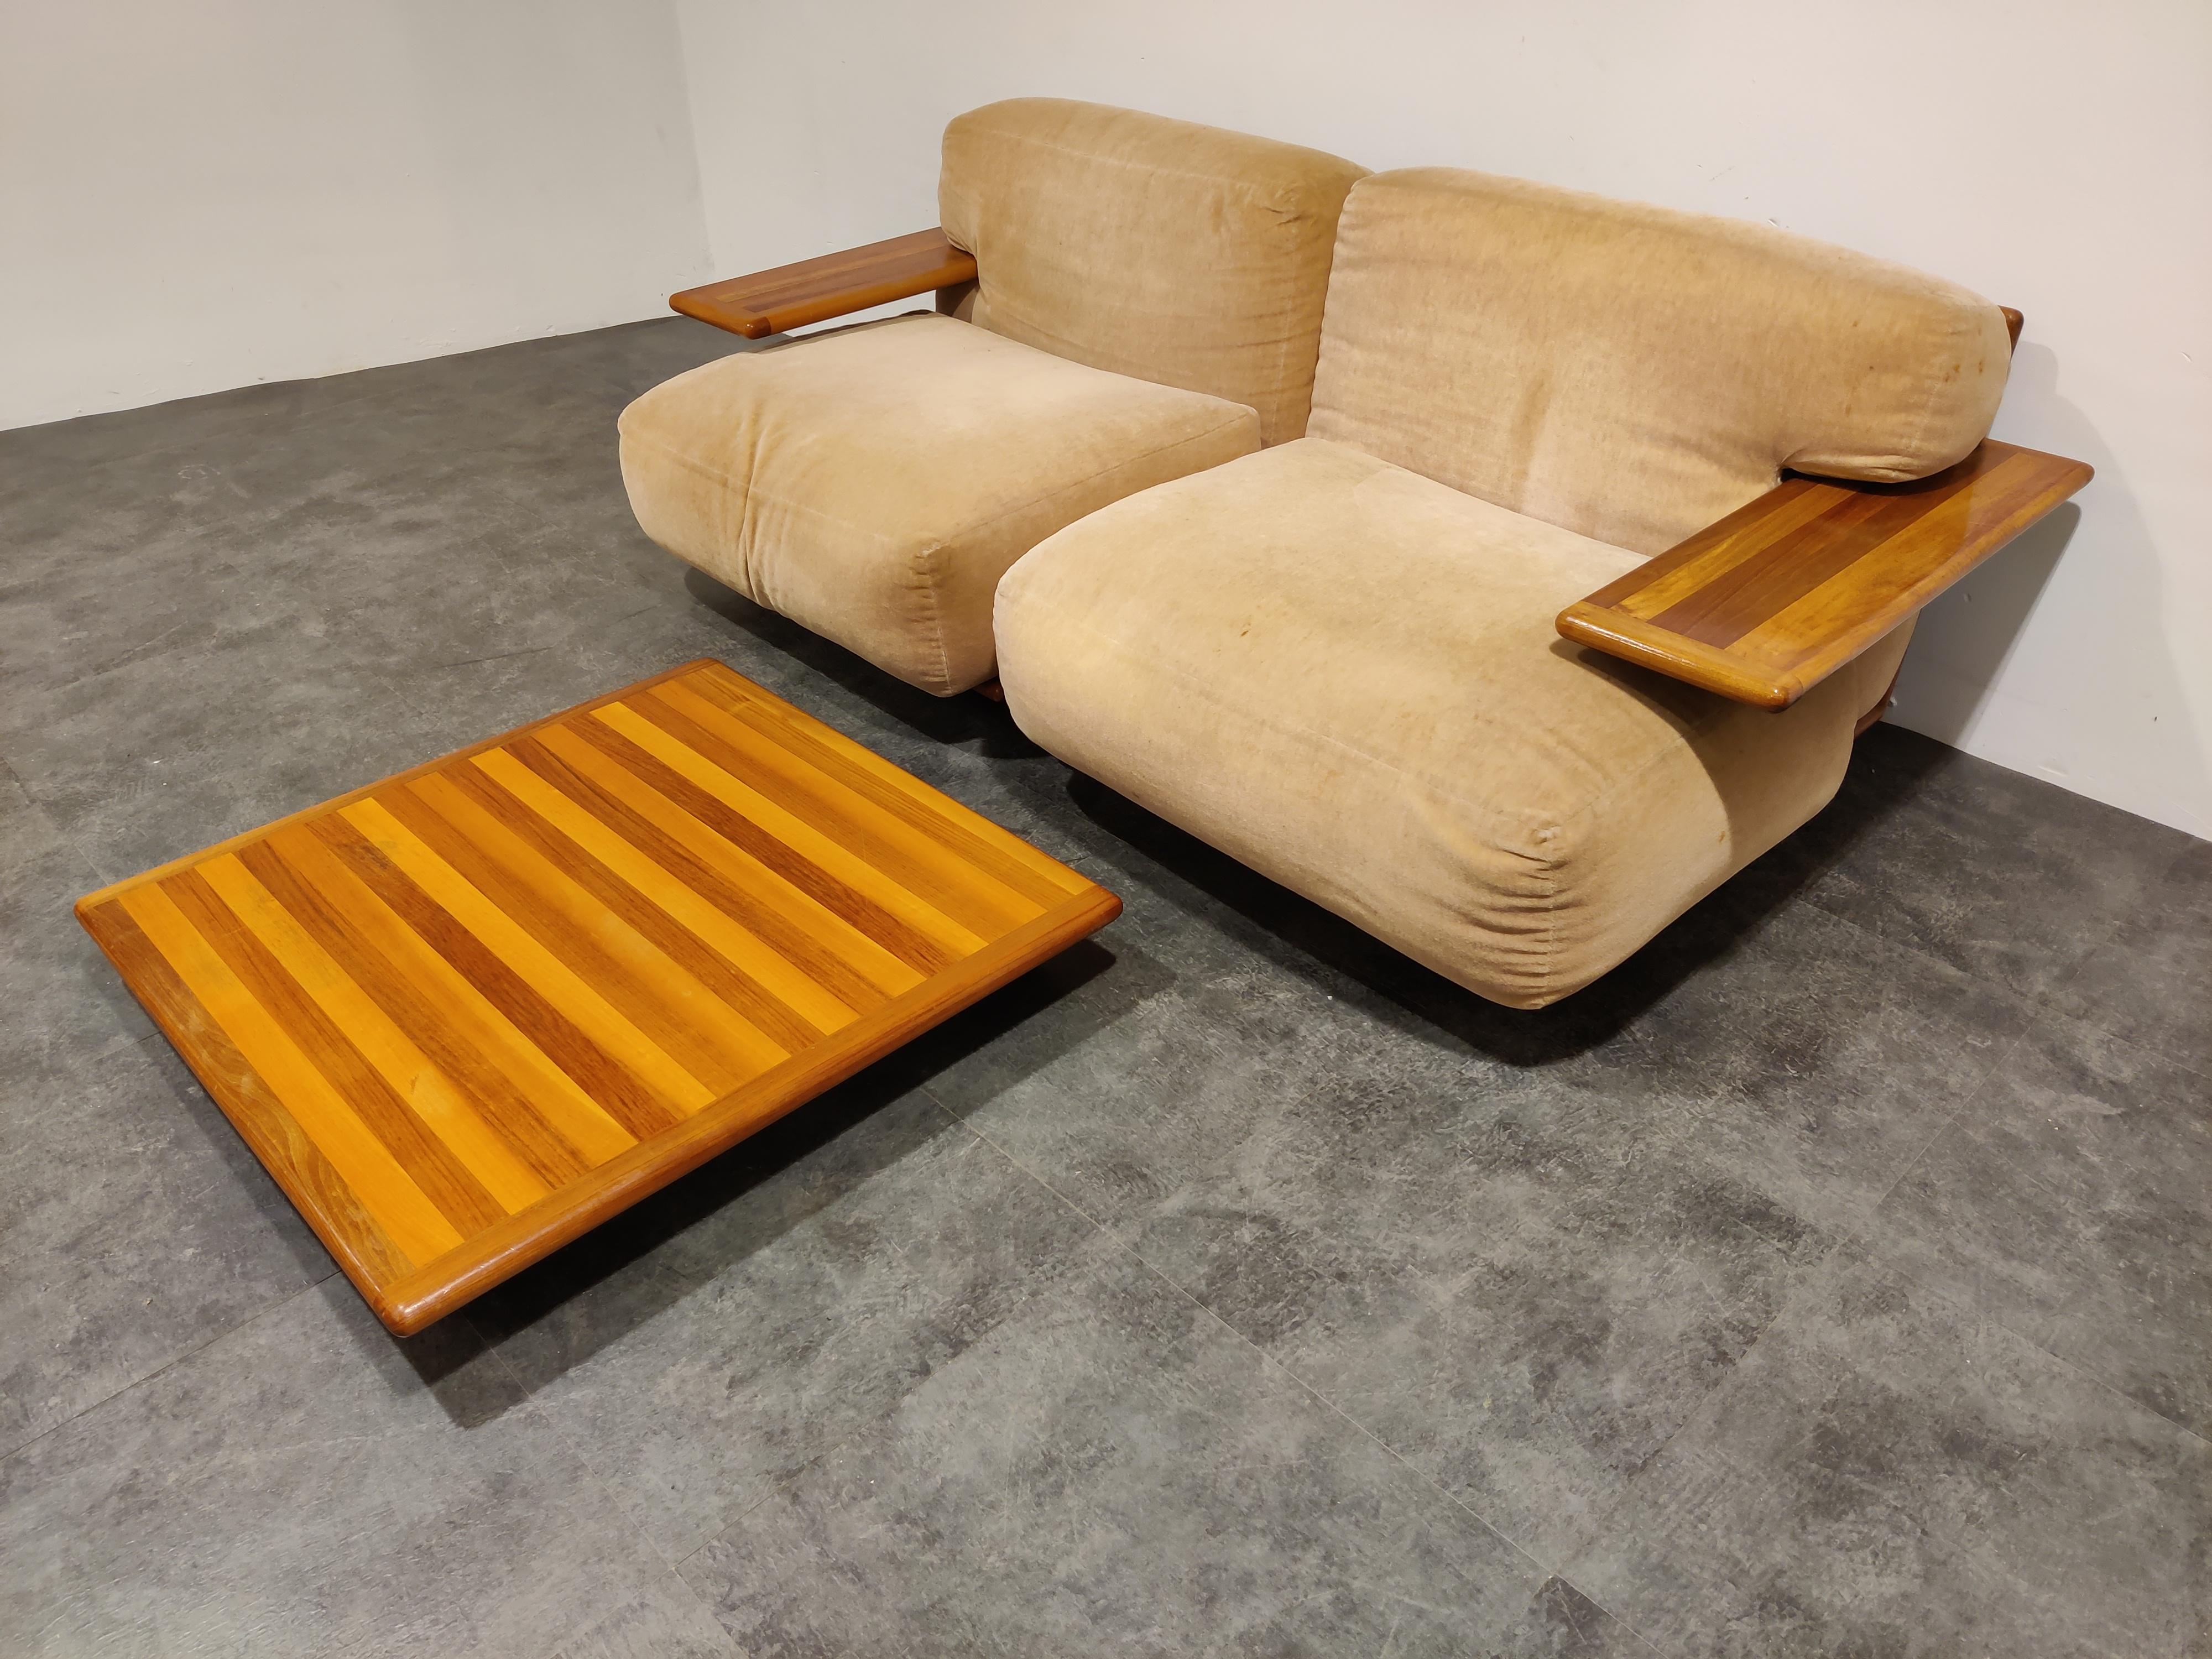 Very rare and beautiful sofa designed by Mario Bellini for Cassina in 1971. - Model Pianura

It comes with the matching low coffee table.

The beautiful wood makes the design really stand out.

Original fabric upholstery, can be redone on